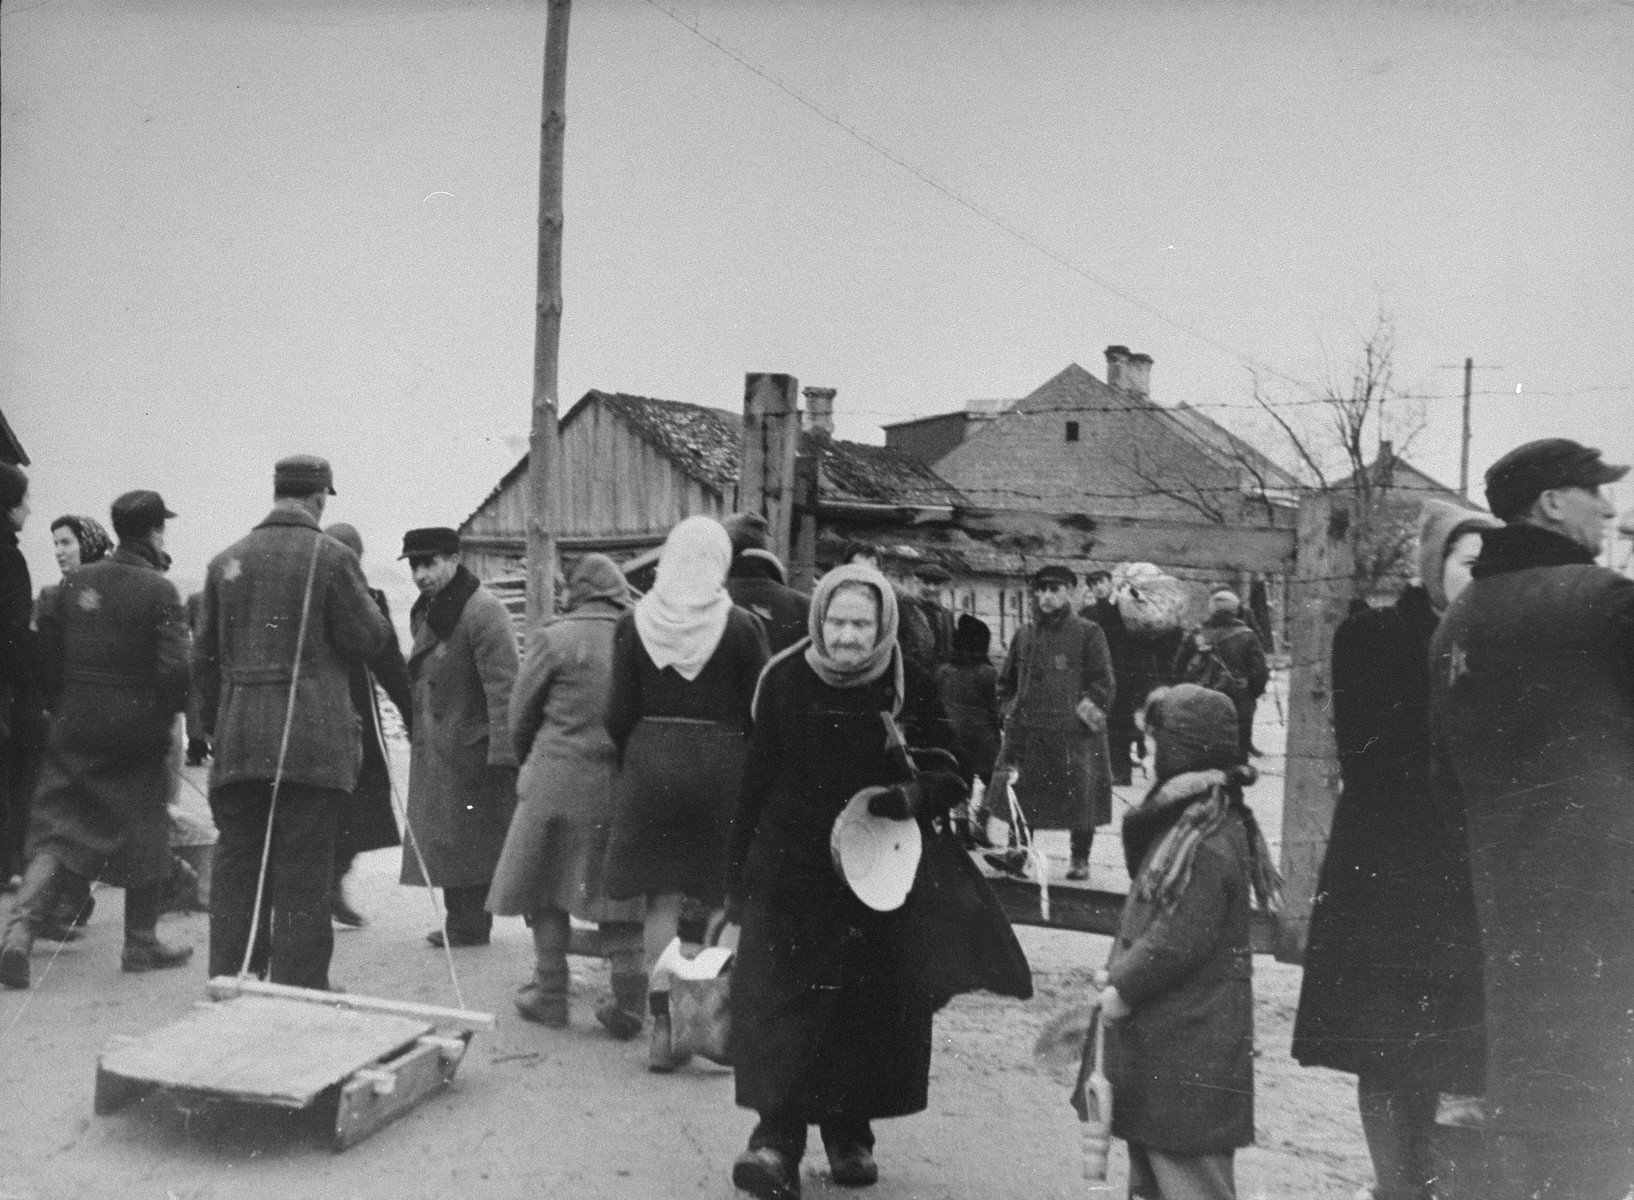 Jews move their household belongings to new quarters in the Kovno ghetto following a reduction in the size of the ghetto.

Among those pictured is Yitzhak Elhanan Rabinowich (far right), Jewish manager of the German labor office in the ghetto.  The elderly woman in the center is Sara Abramowitz.